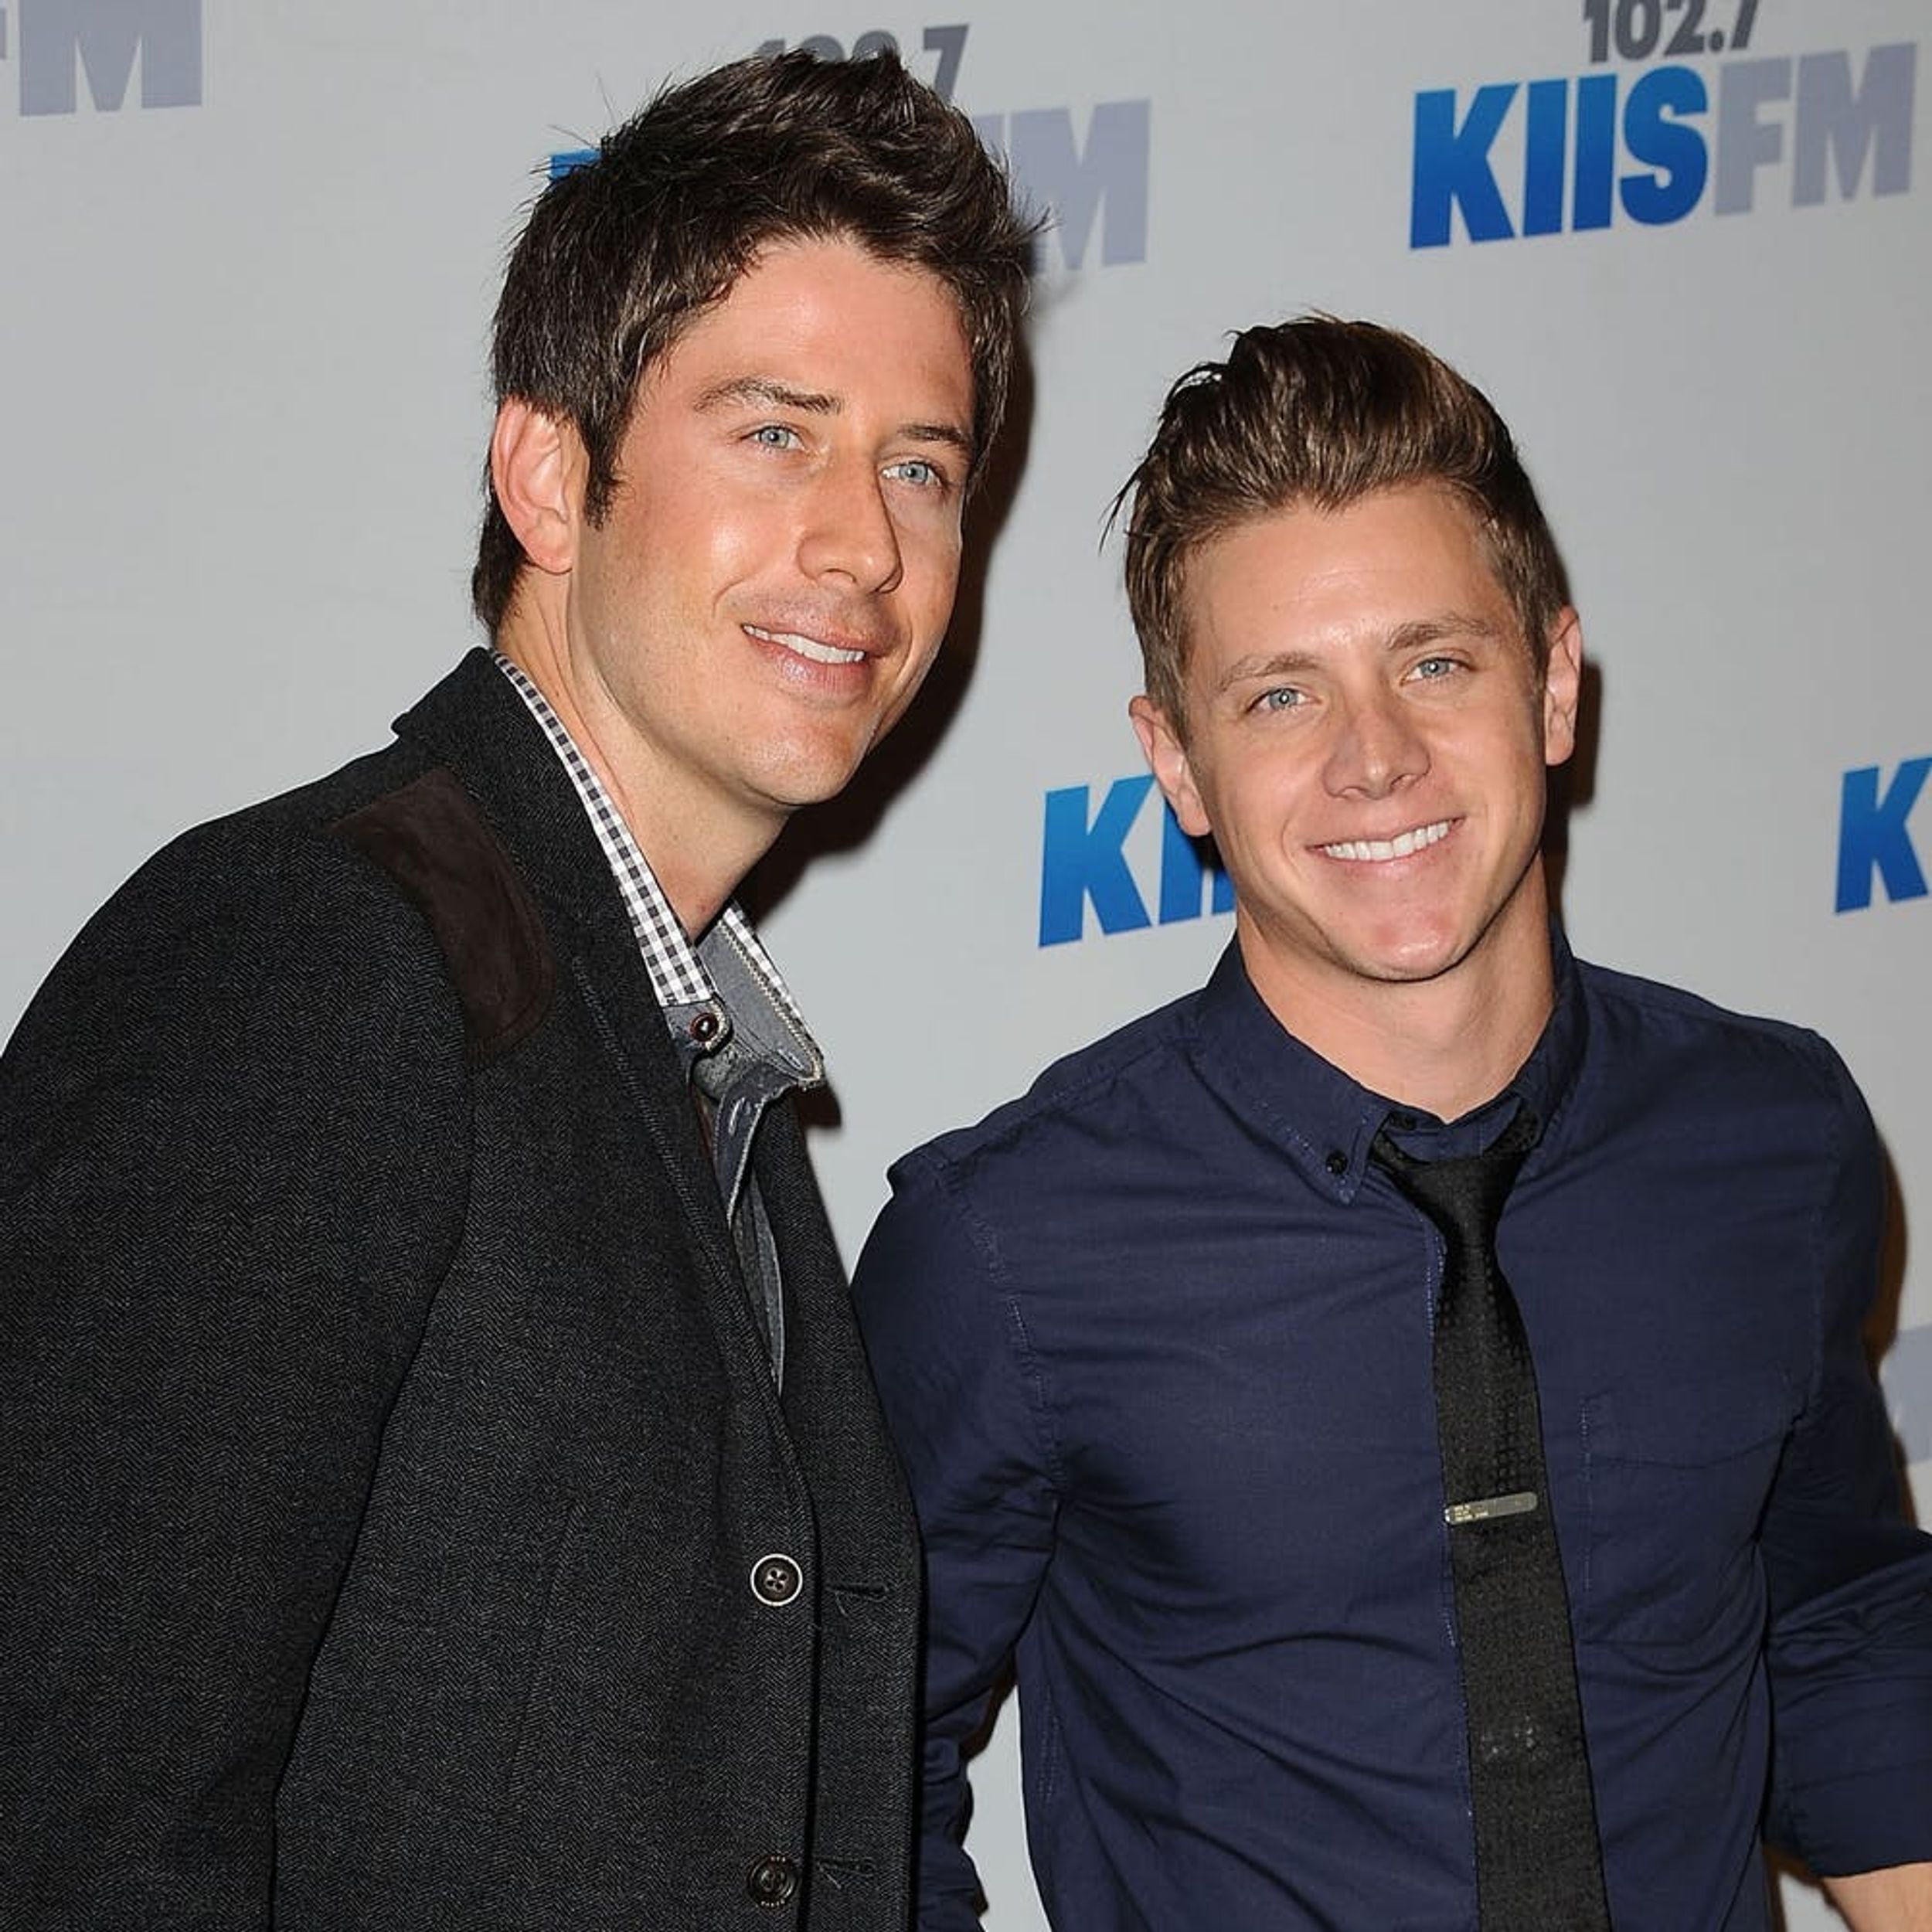 The Bachelor’s Arie Luyendyk Jr. Responds to Jef Holm’s $5,000 Bet Against Him